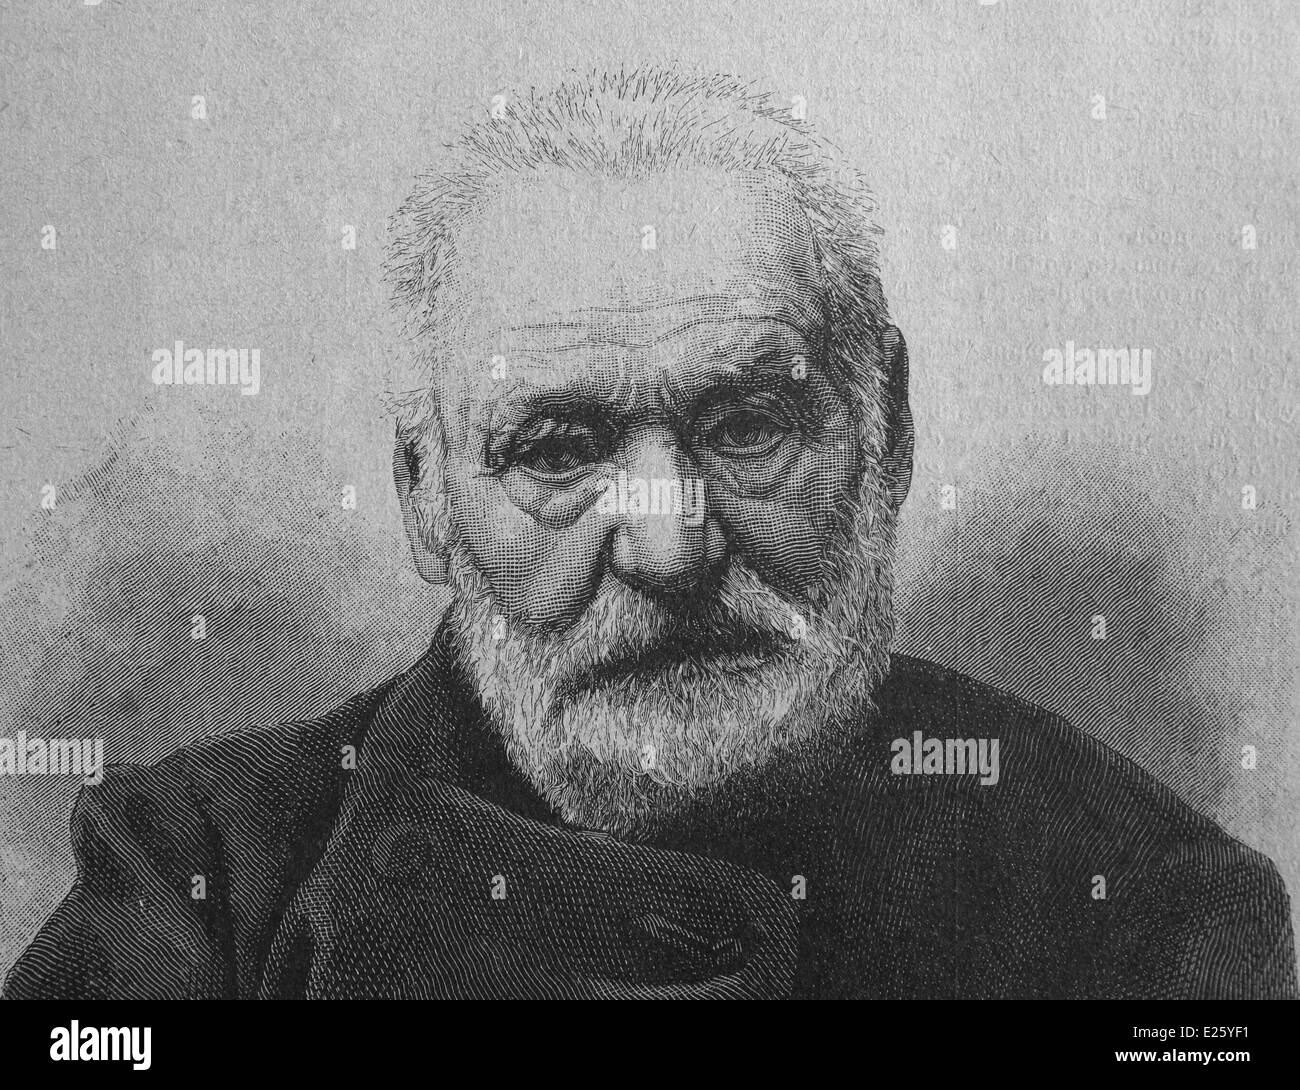 Victor Hugo (1802-1885). French poet, novelist and dramatist of the Romantic movement. Engraving, 19th century. Stock Photo